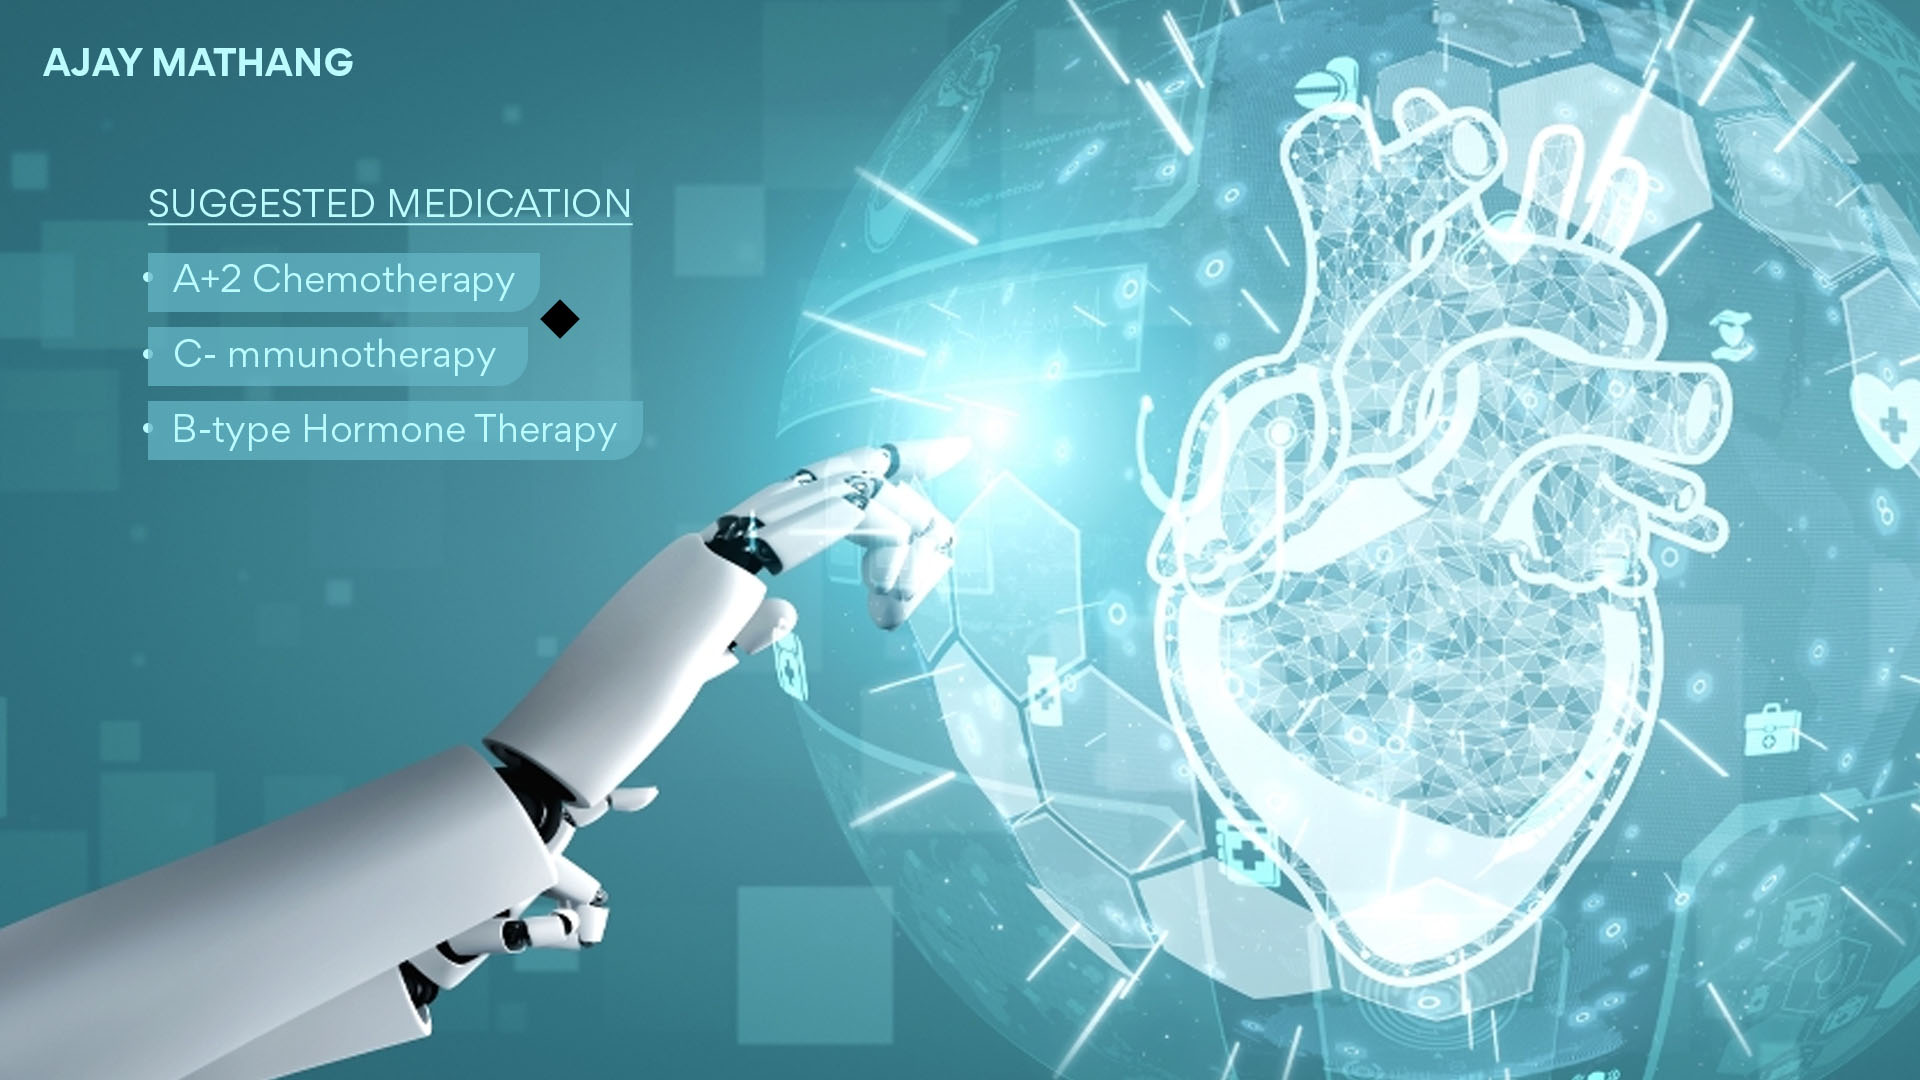 A robotic arm interacting with a holographic heart against a digital globe backdrop, alongside a list of suggested medications, indicating AI-driven patient care and treatment planning.